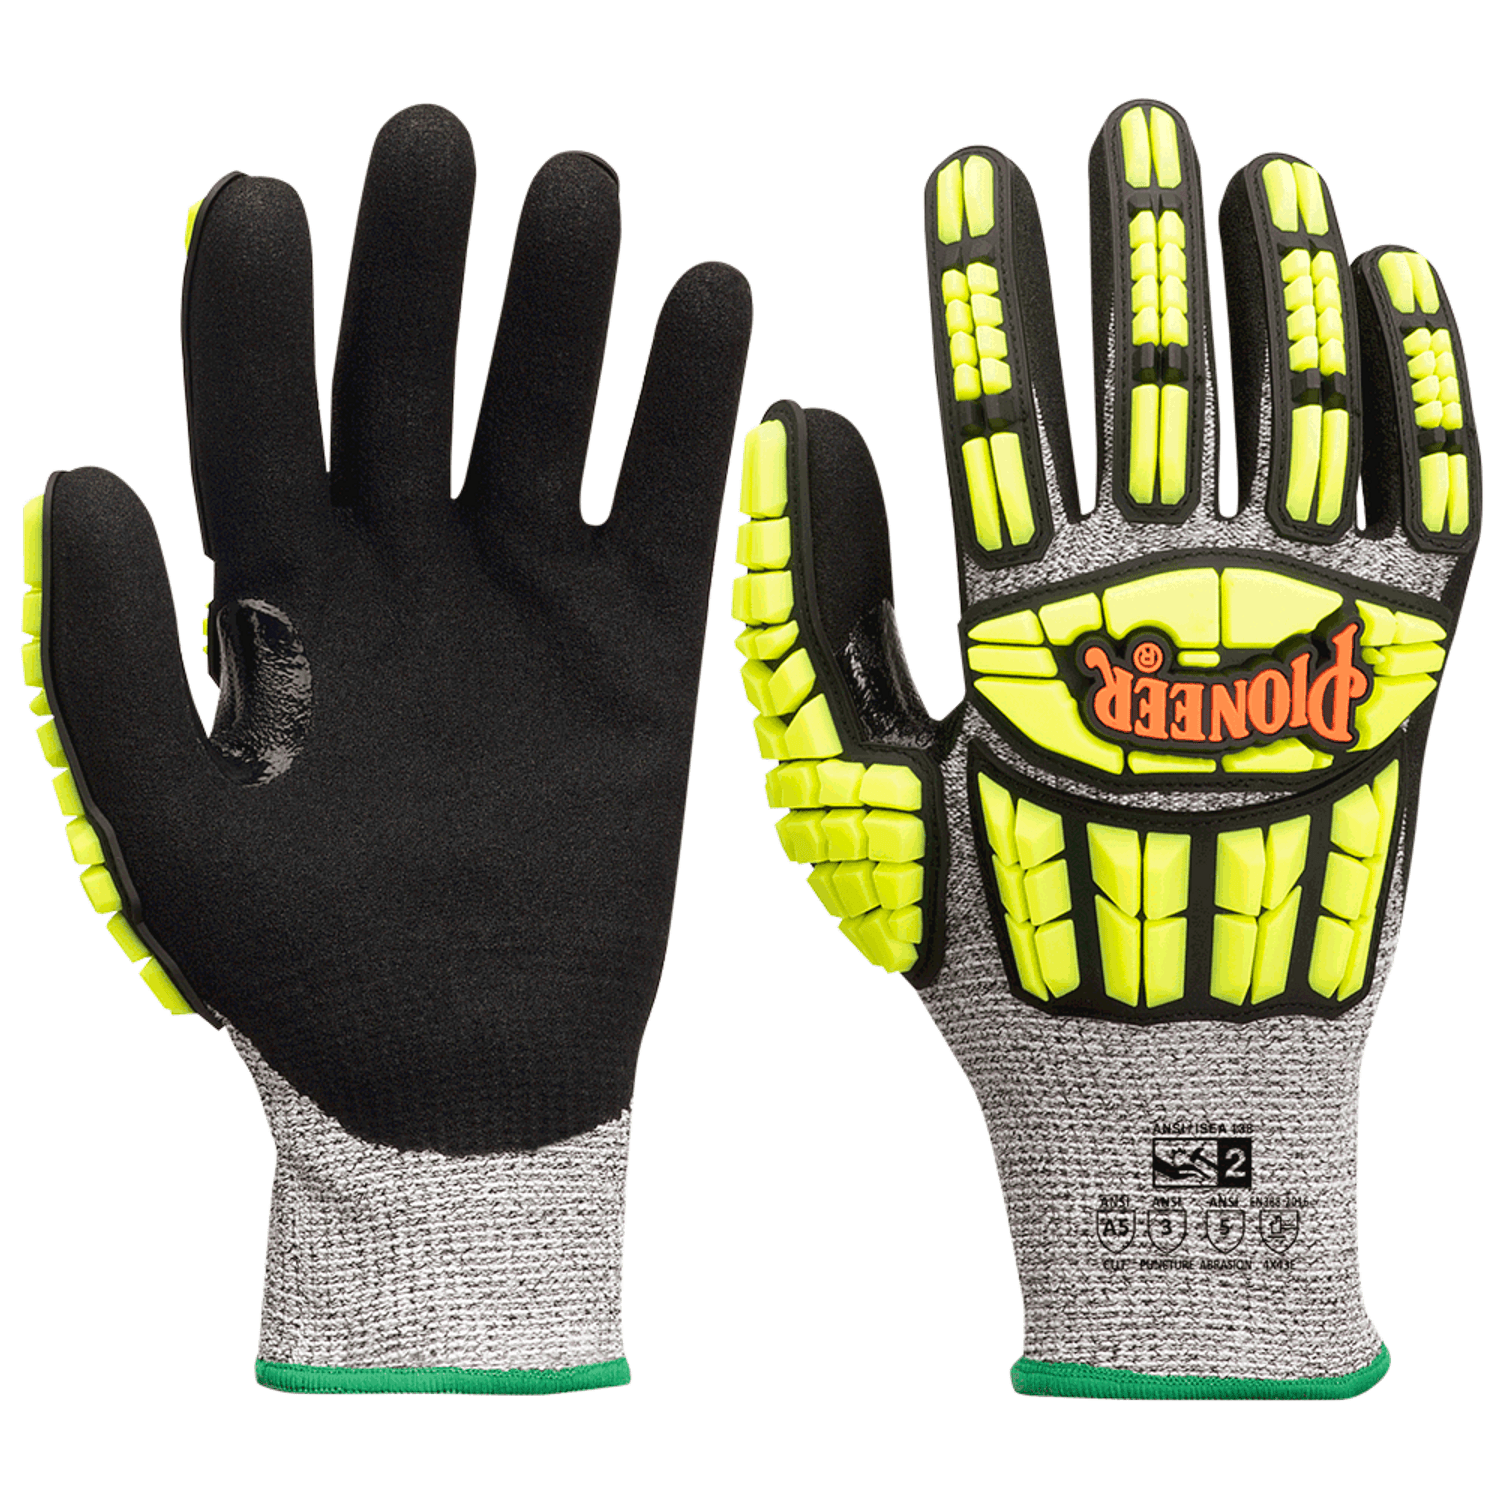 https://cdn11.bigcommerce.com/s-10f42/images/stencil/1500x1500/products/2551/5868/pioneer-cut-puncture-resistant-gloves-safetywear.ca__22405.1630255216.png?c=2